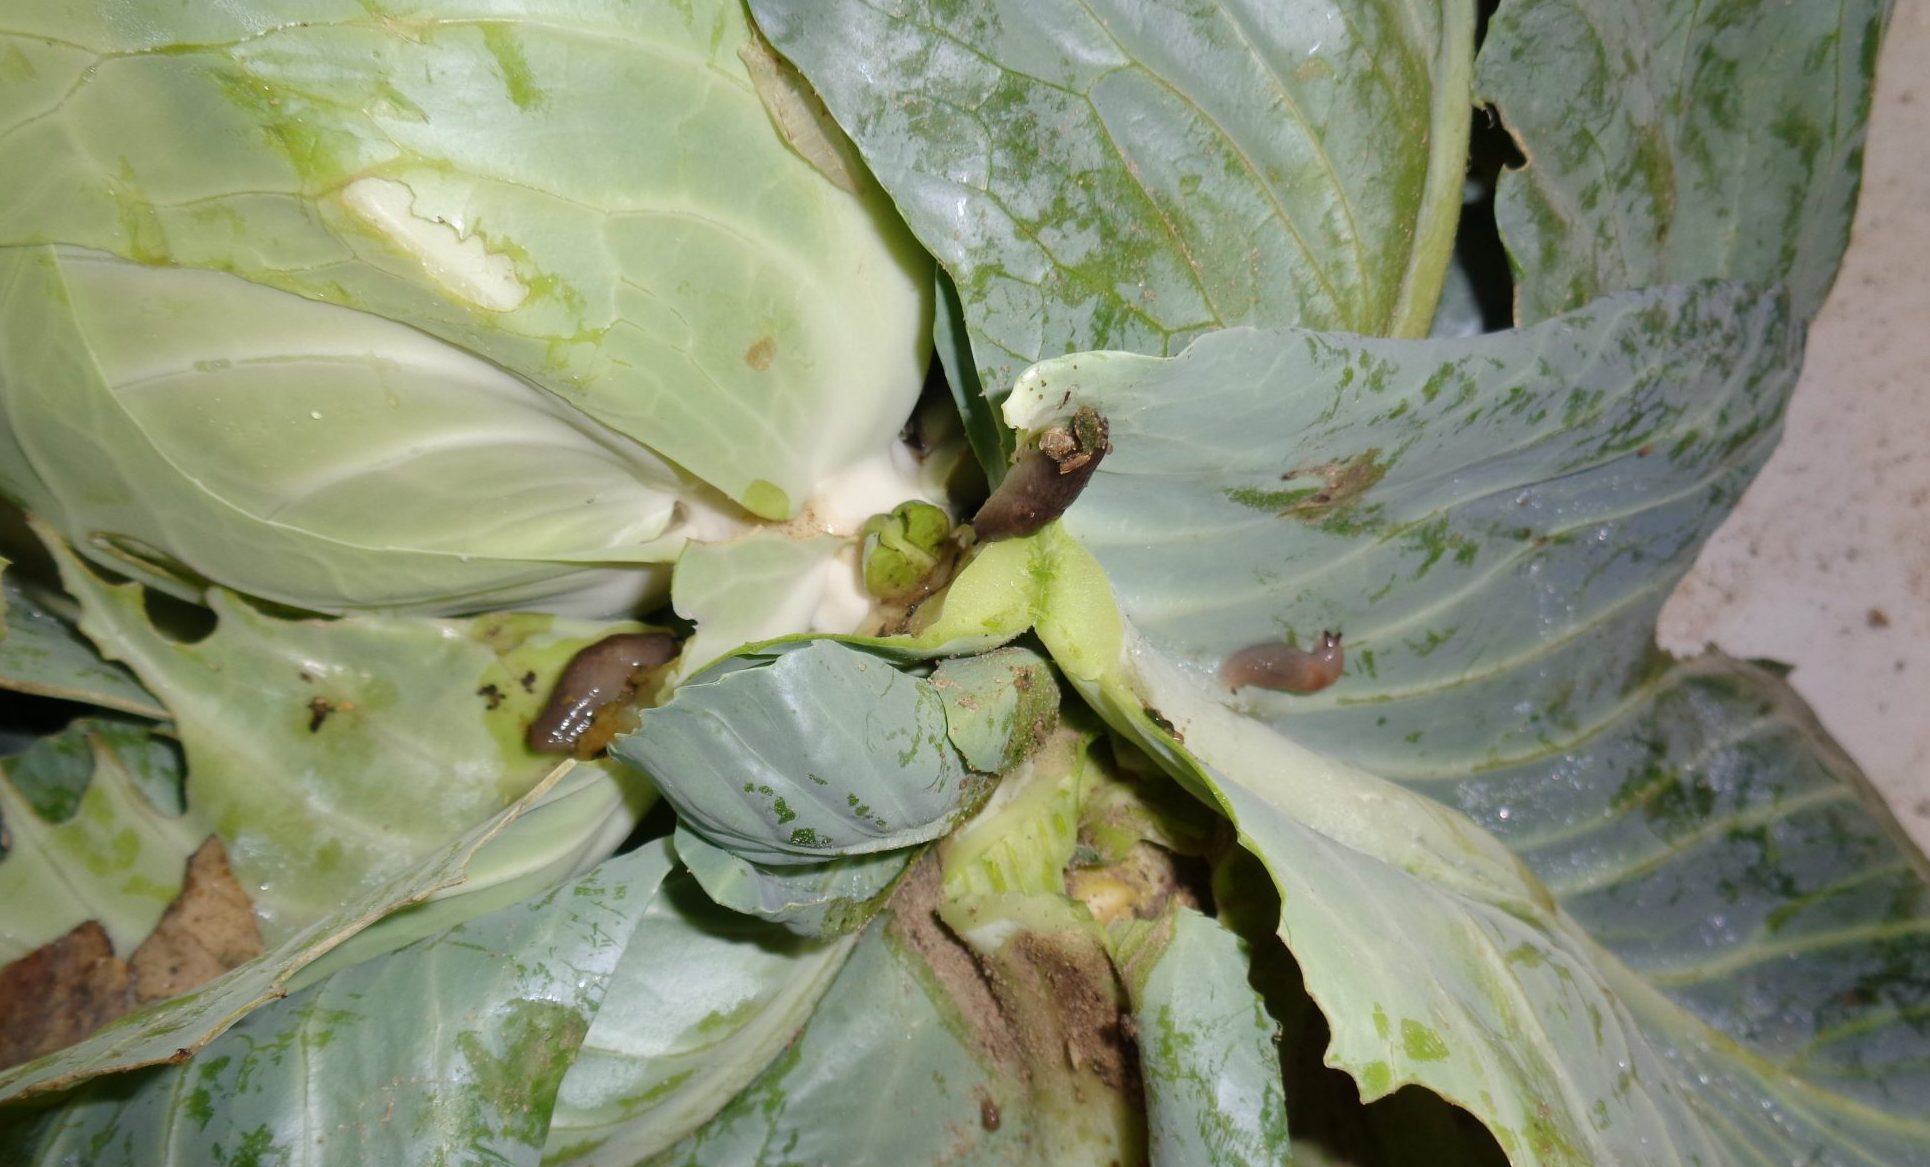 Figure 2. Slug infestation in cabbages during wet weather can lead to direct produce loss and contamination.